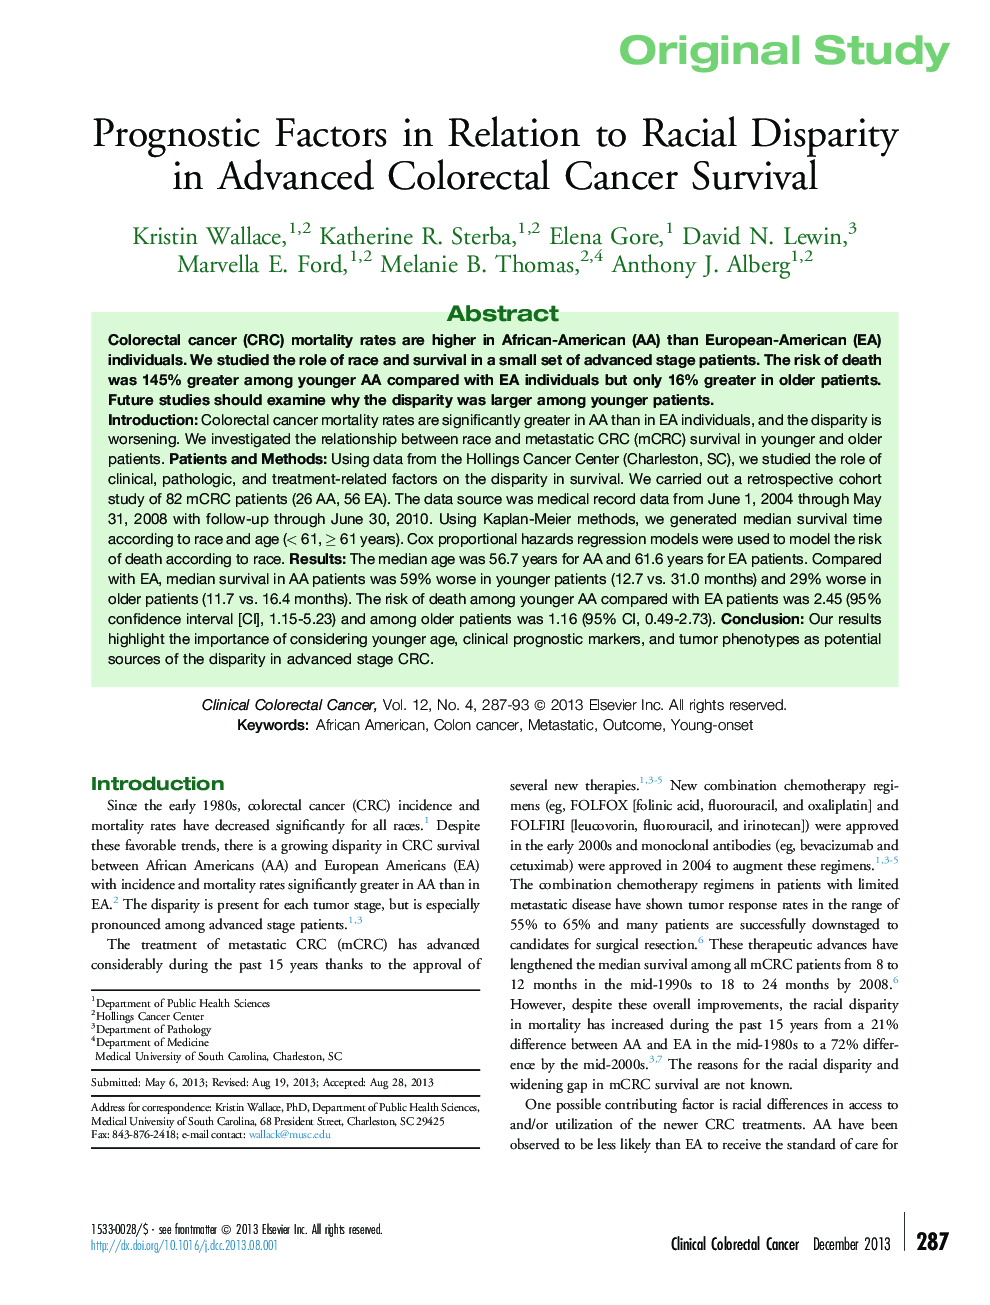 Prognostic Factors in Relation to Racial Disparity in Advanced Colorectal Cancer Survival